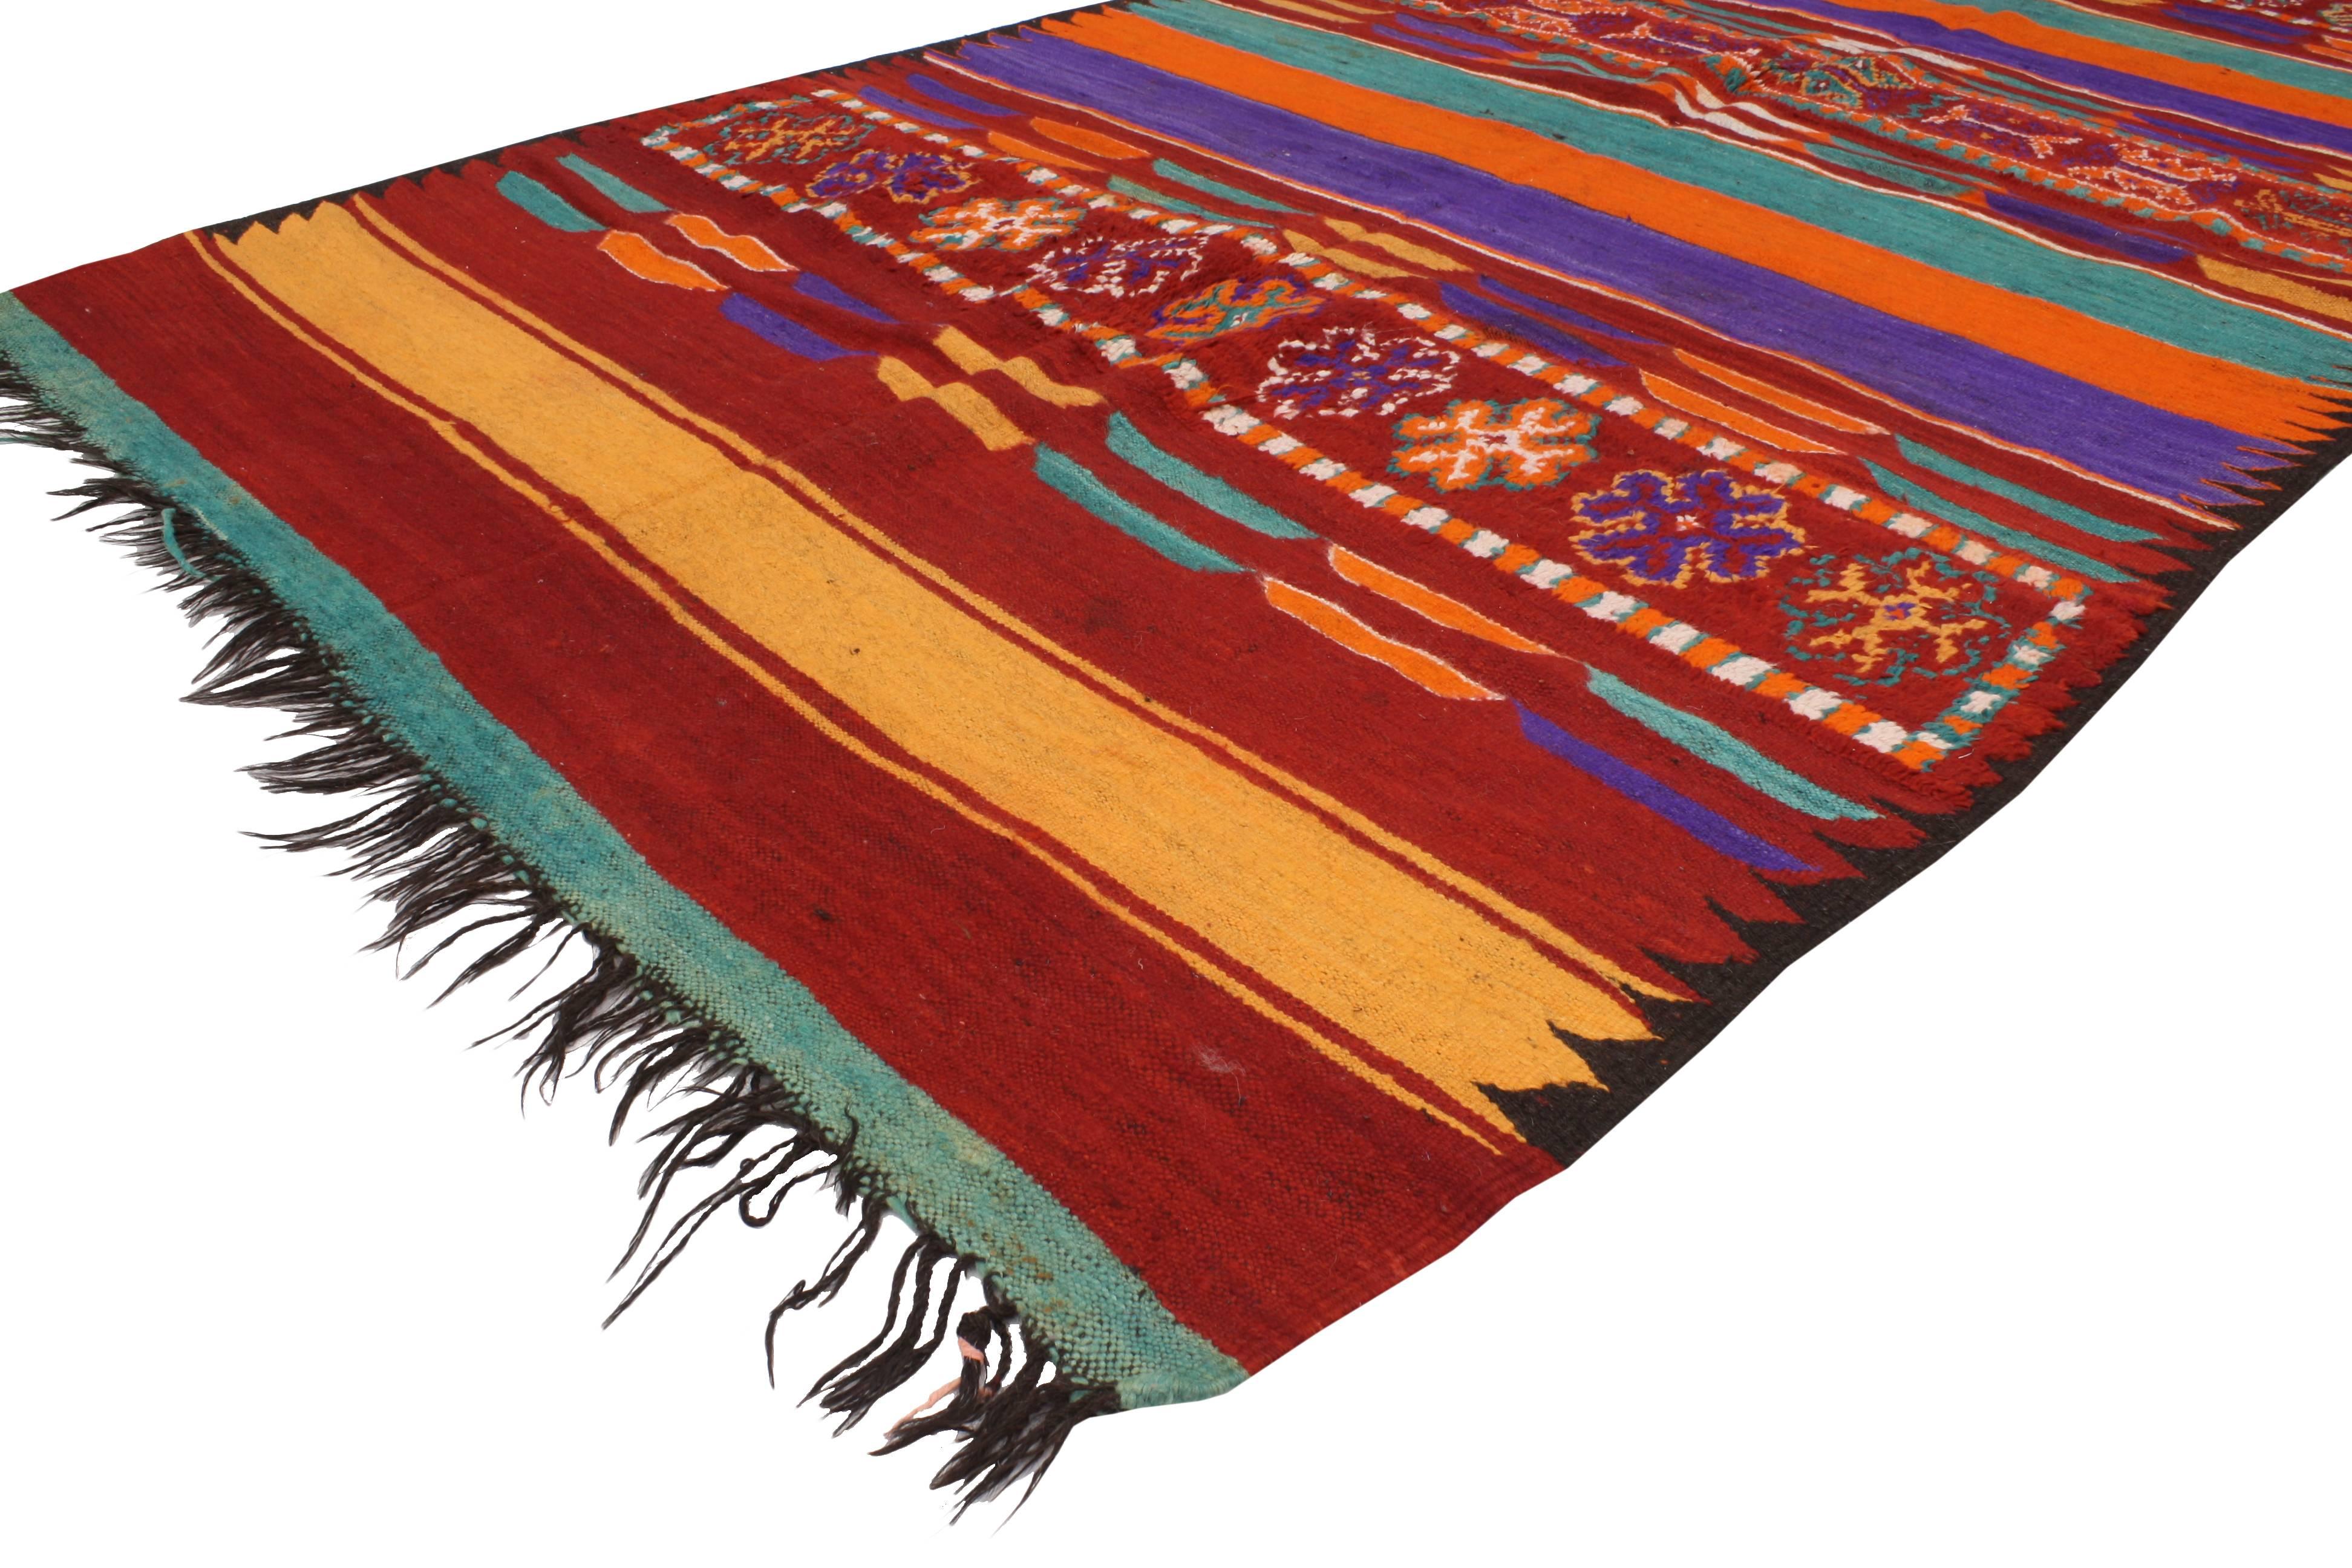 20417 Vintage Berber Moroccan Kilim Rug with Modern Cabin Style, Flat-weave Kilim Rug. Displaying clean lines and a bold colorway, this hand-woven vintage Berber Moroccan Kilim rug can create a global look from around the world! The flat-weave Kilim